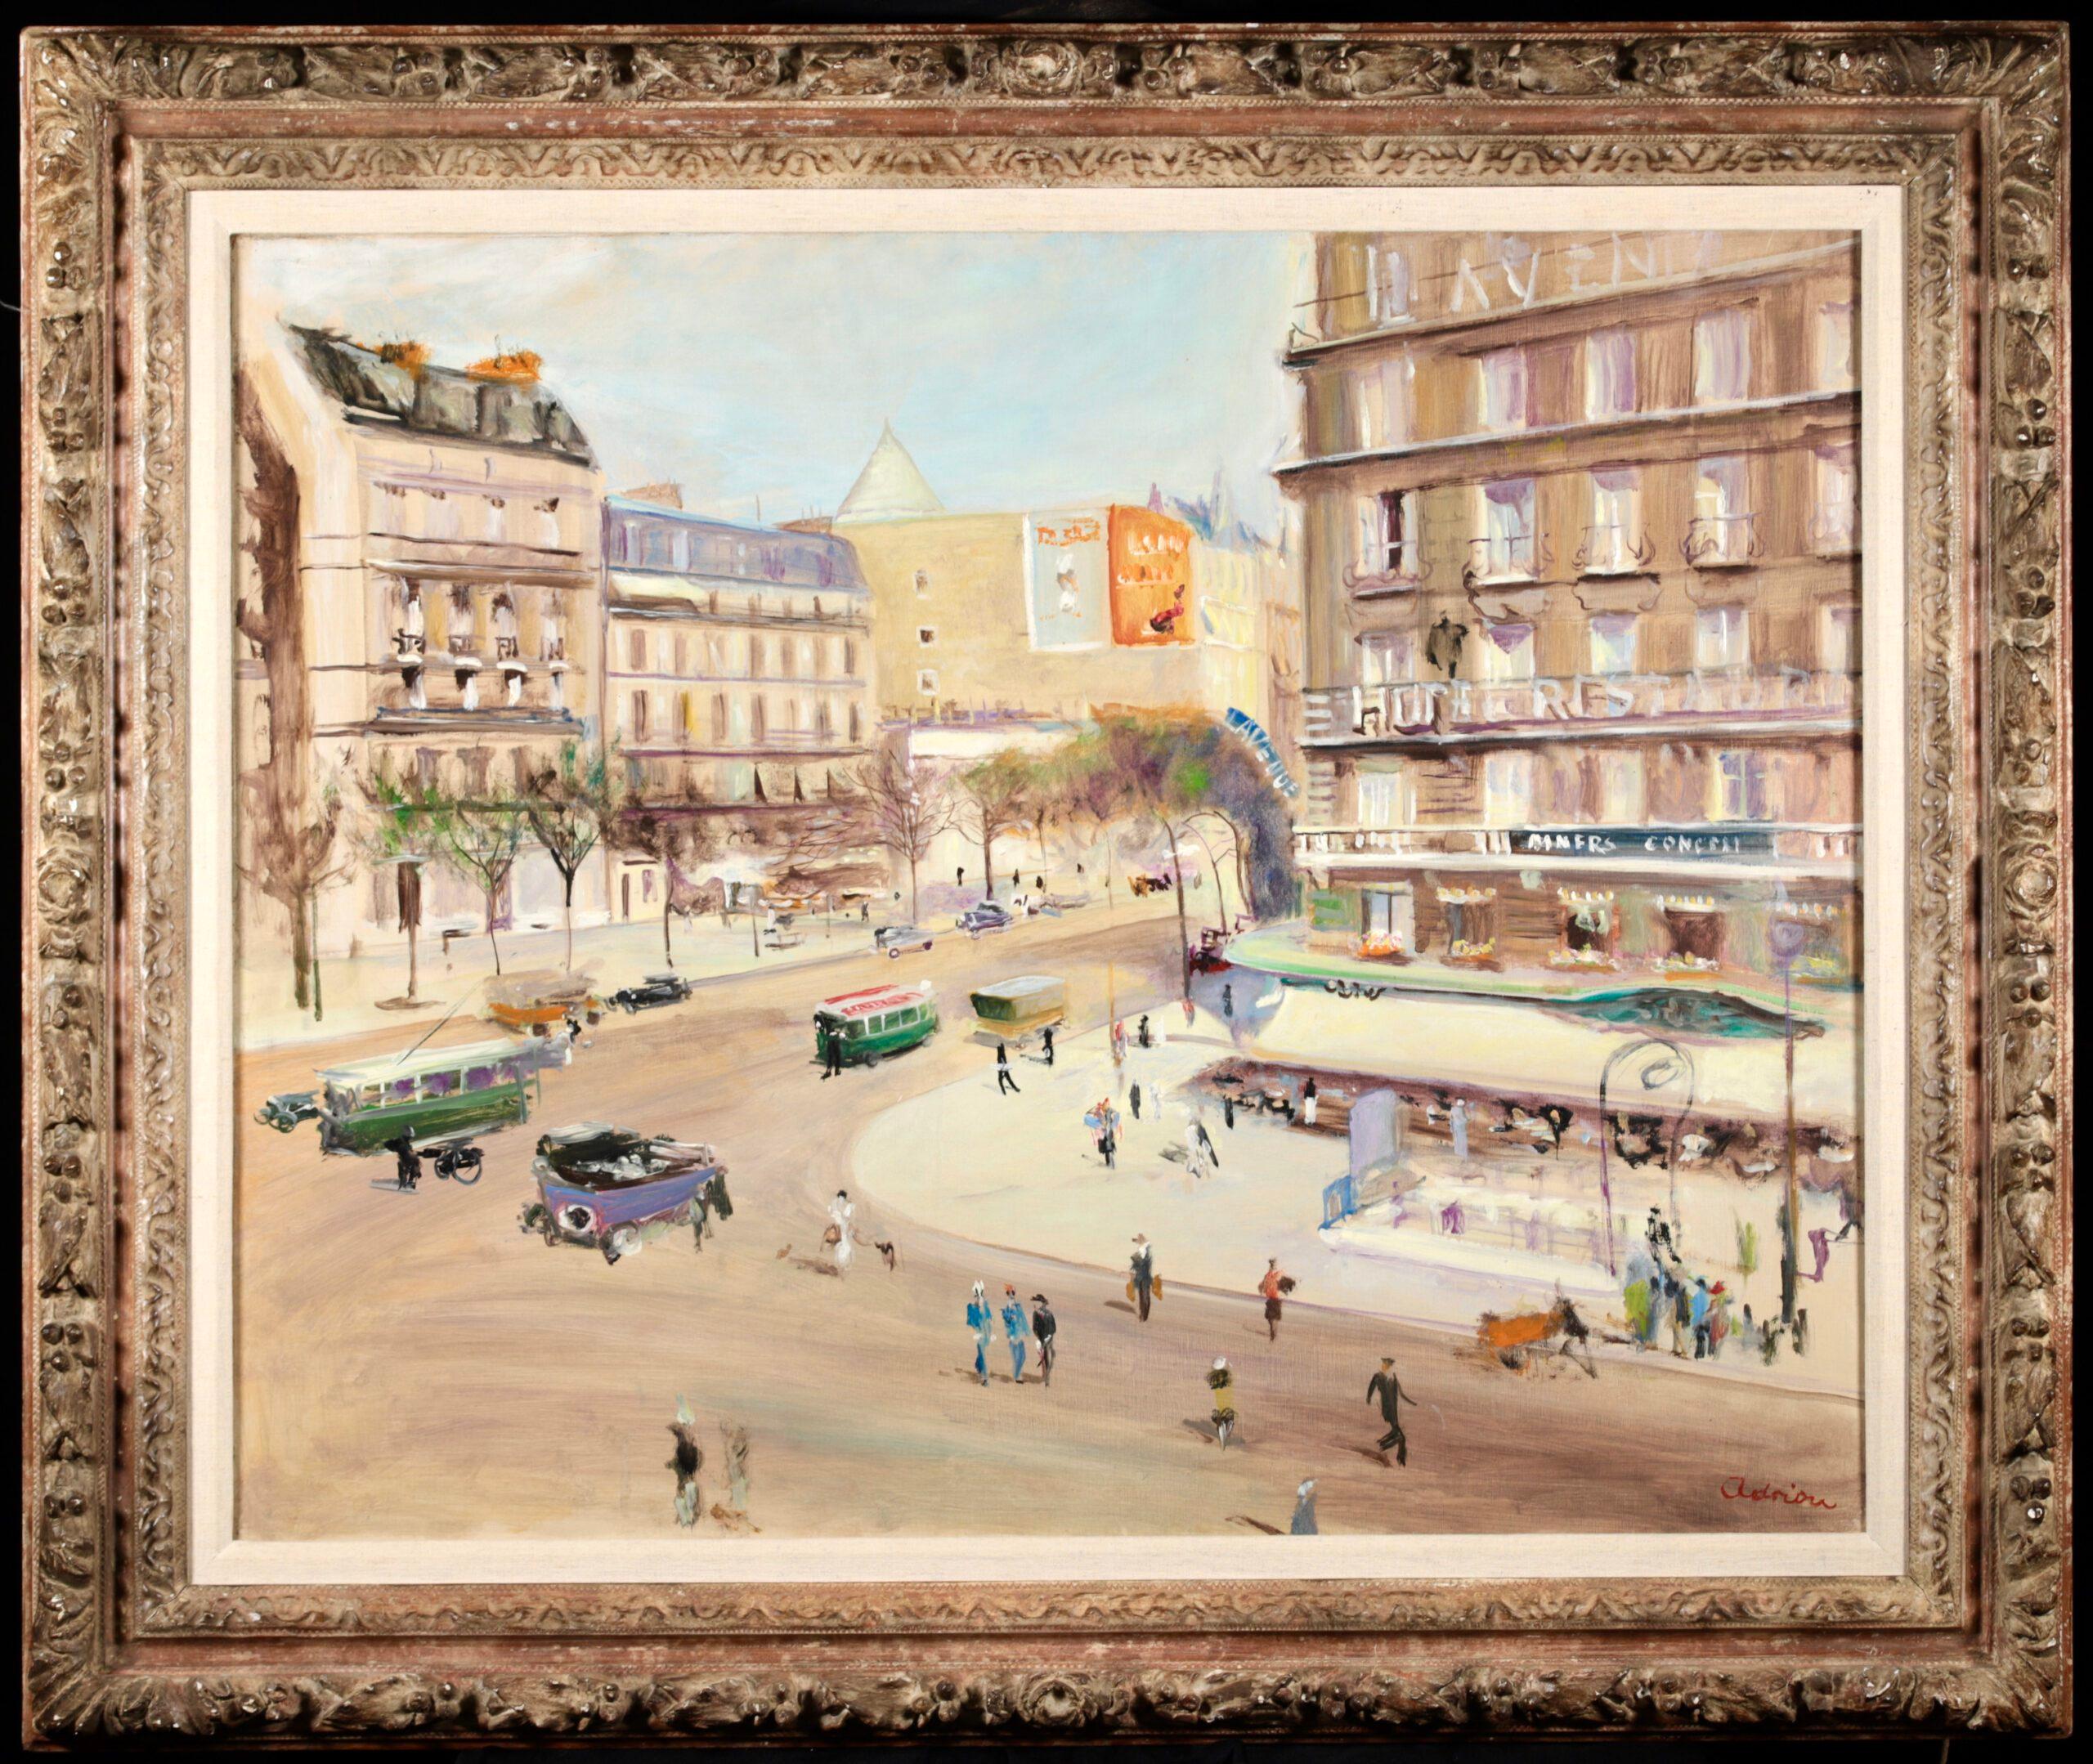 Signed figures in landscape oil on canvas circa 1920 by French post impressionist painter Lucien Adrion. The painting depicts people going about their daily lives on the streets of Paris, France on a sunny spring day with trams travelling along the